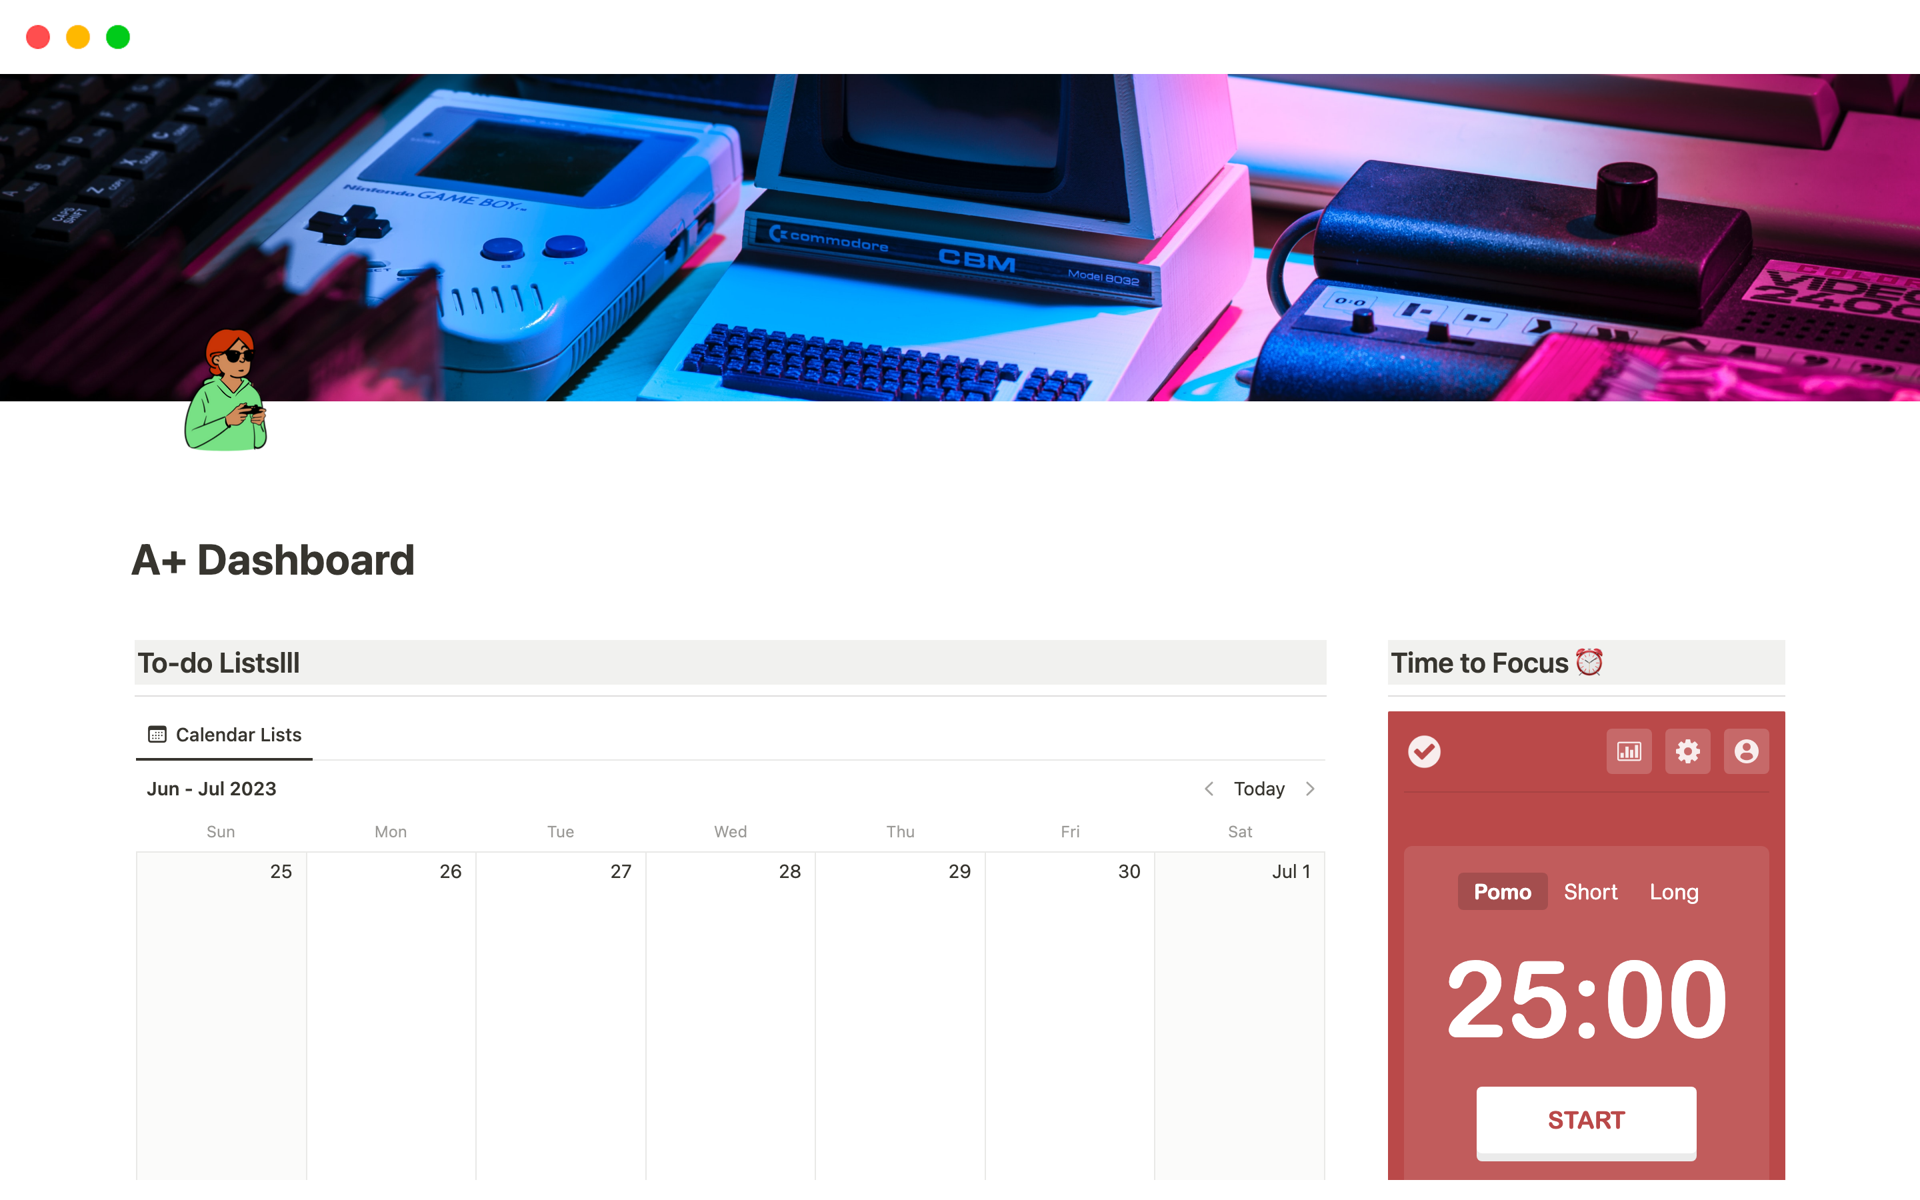 "A+ student dashboard" helps you organize your schedule, to-do lists, and courses overview in one place.